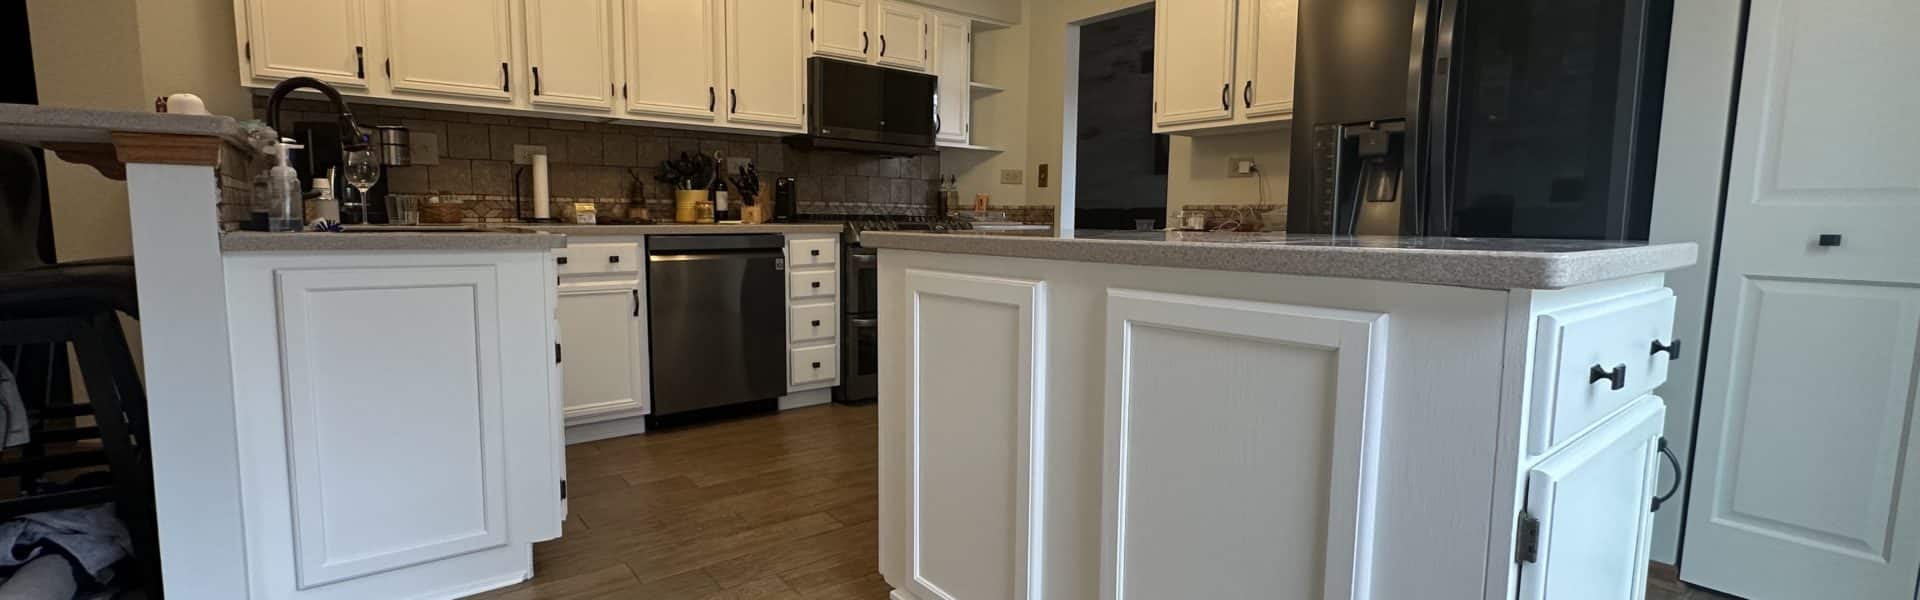 White painted island cabinets